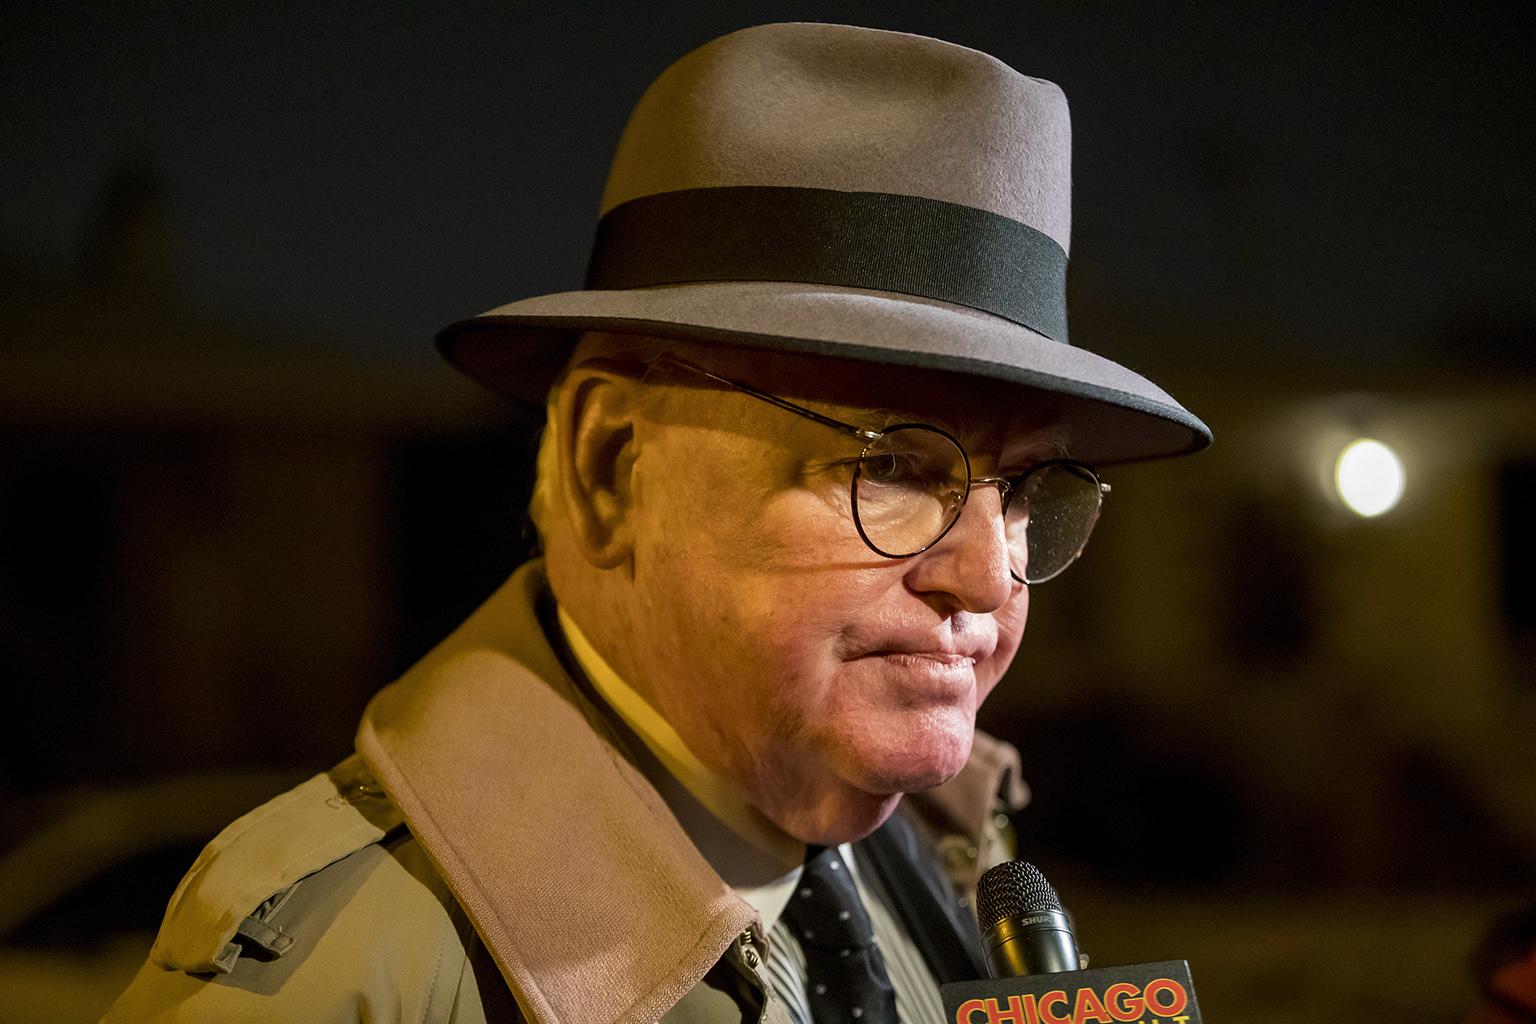 Ald. Ed Burke speaks to “Chicago Tonight” and other media after returning to his home on the Southwest Side on Thursday, Nov. 29, 2018. Earlier in the day, federal agents conducted a raid on his offices. (Brian Cassella / Chicago Tribune via AP)